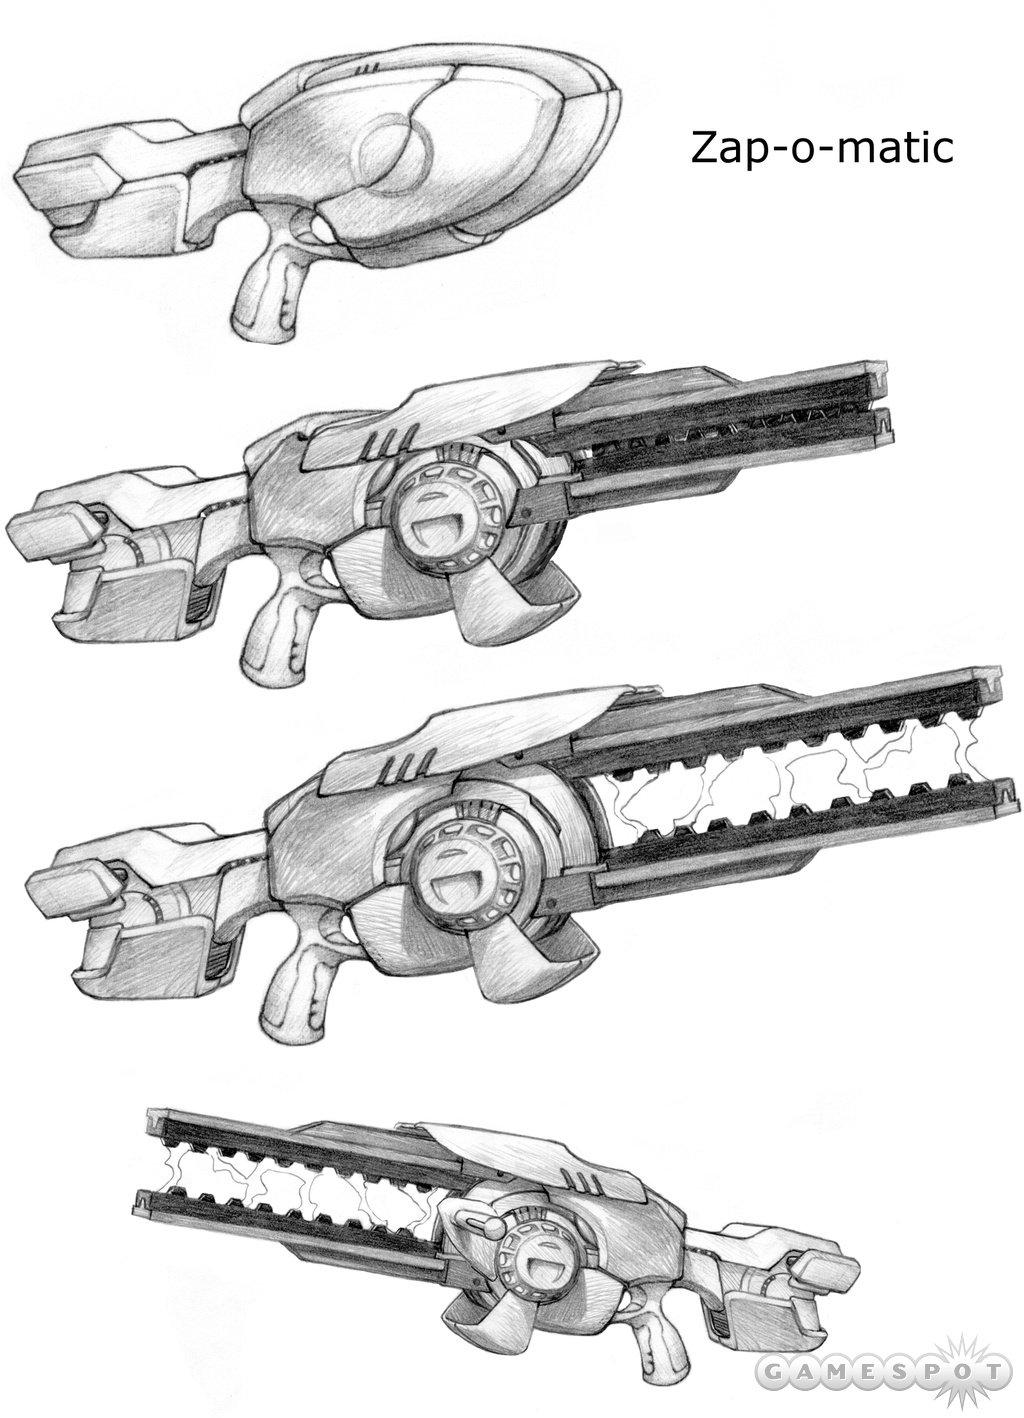 Some of the weapon designs are pretty neat.